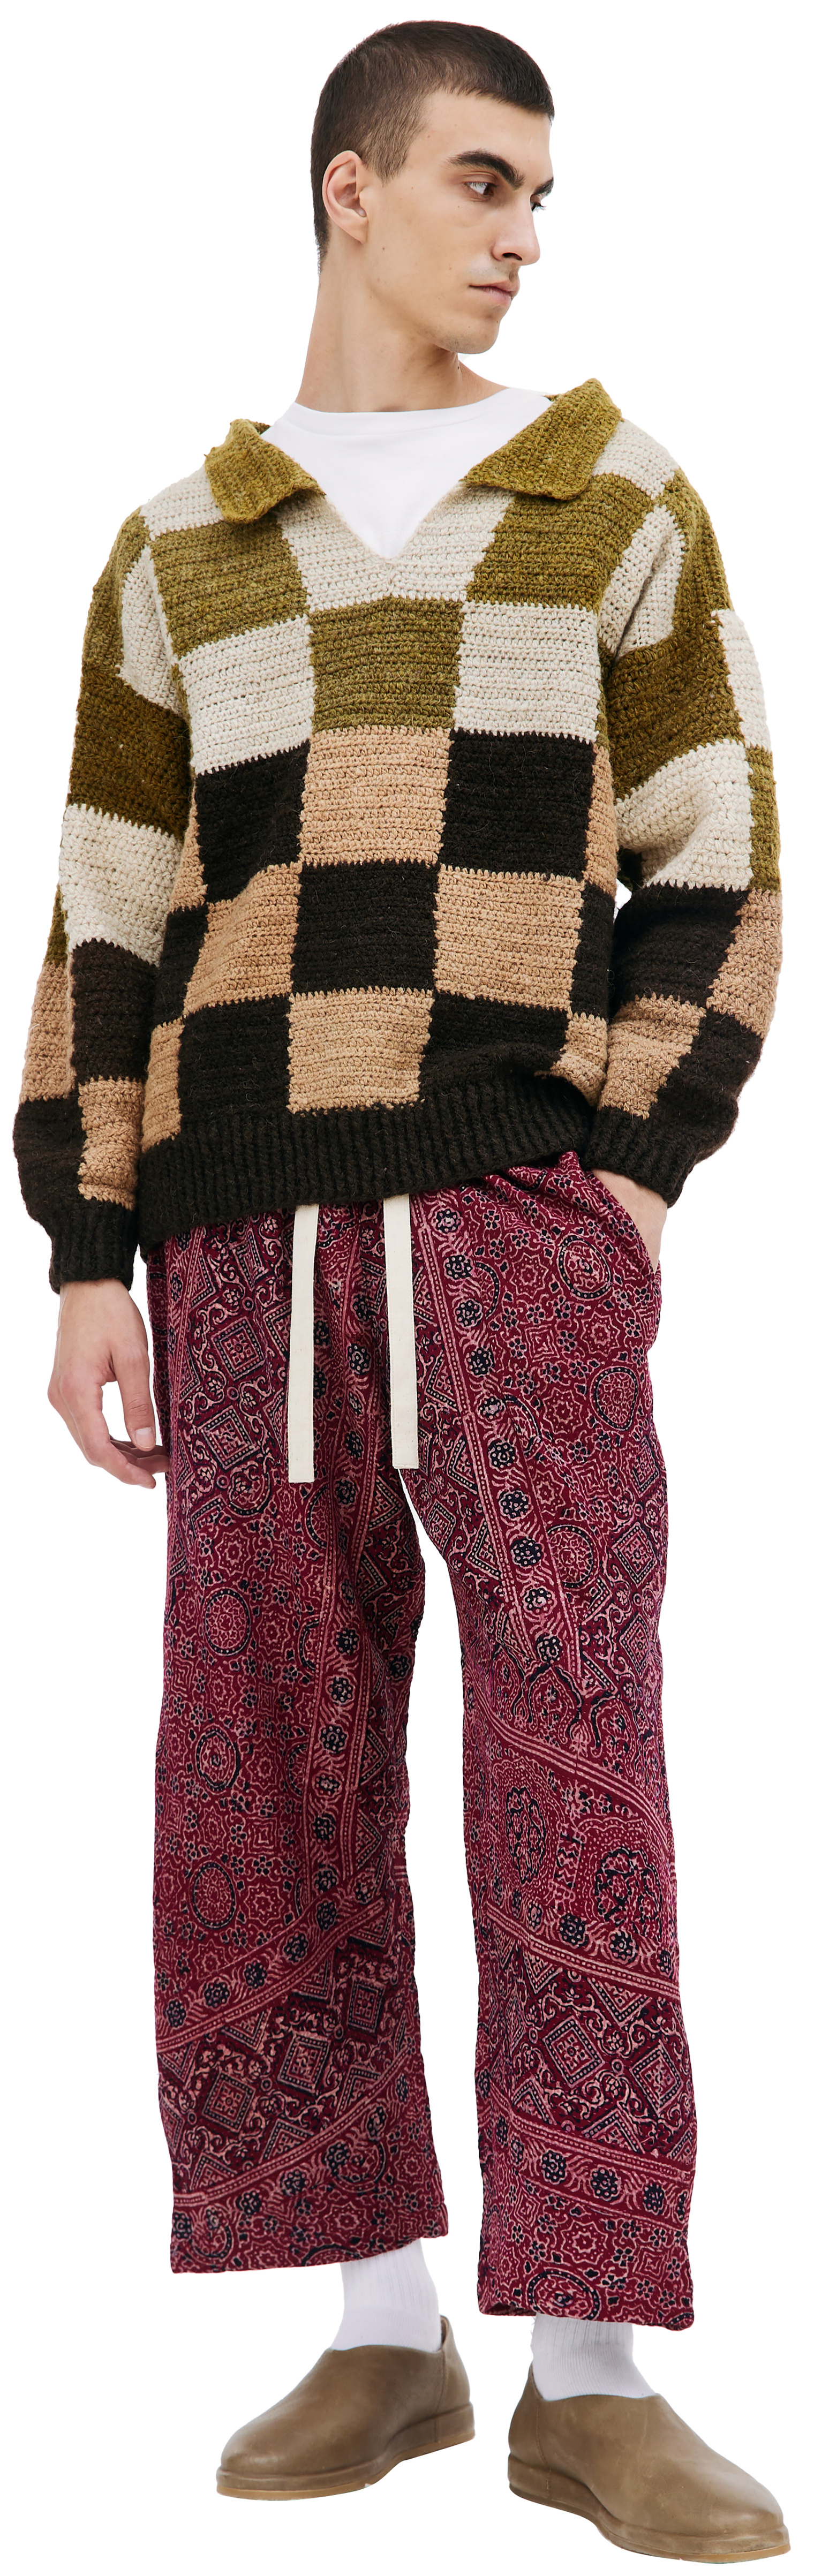 KARU RESEARCH Wool knitted check sweater